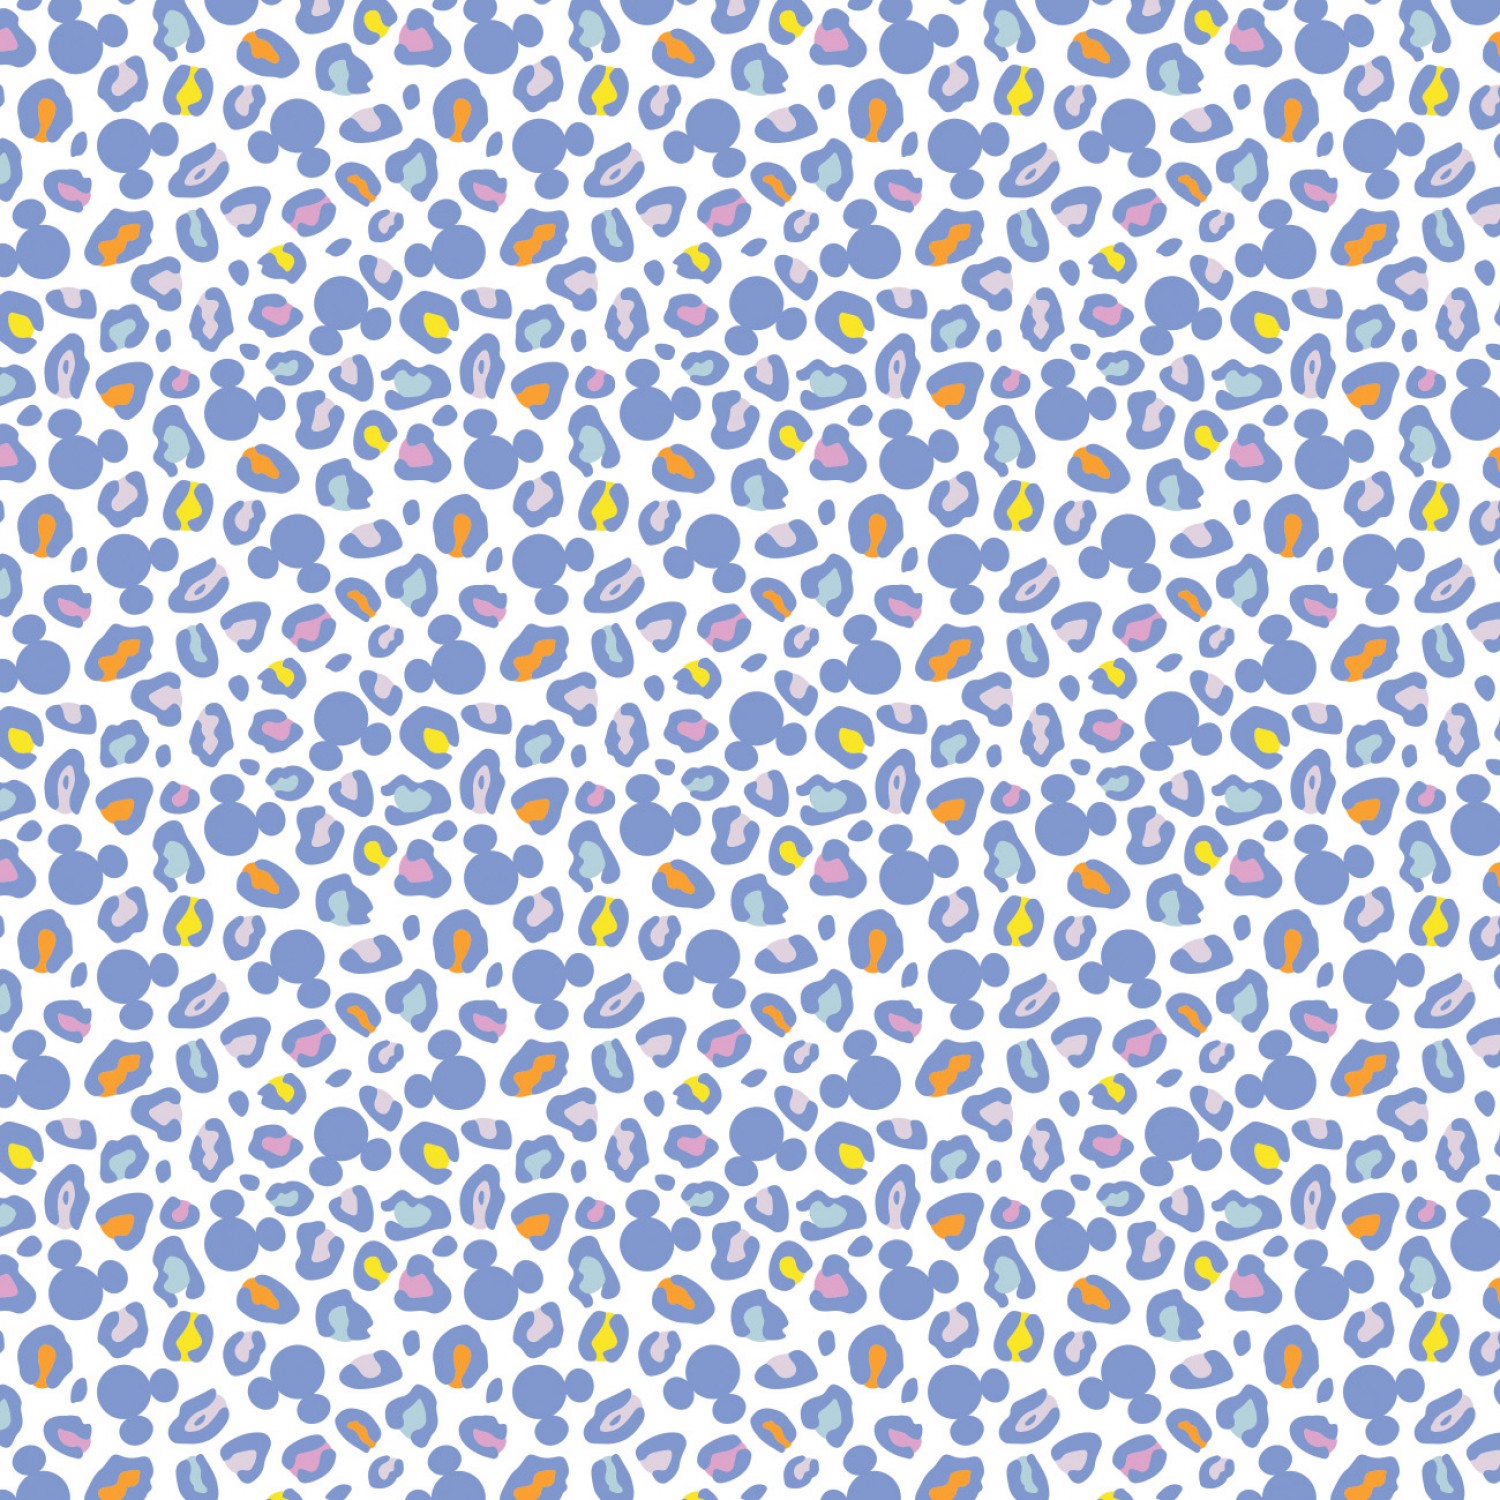 Disney Mickey Mouse Ears Animal Print Fabric - Periwinkle